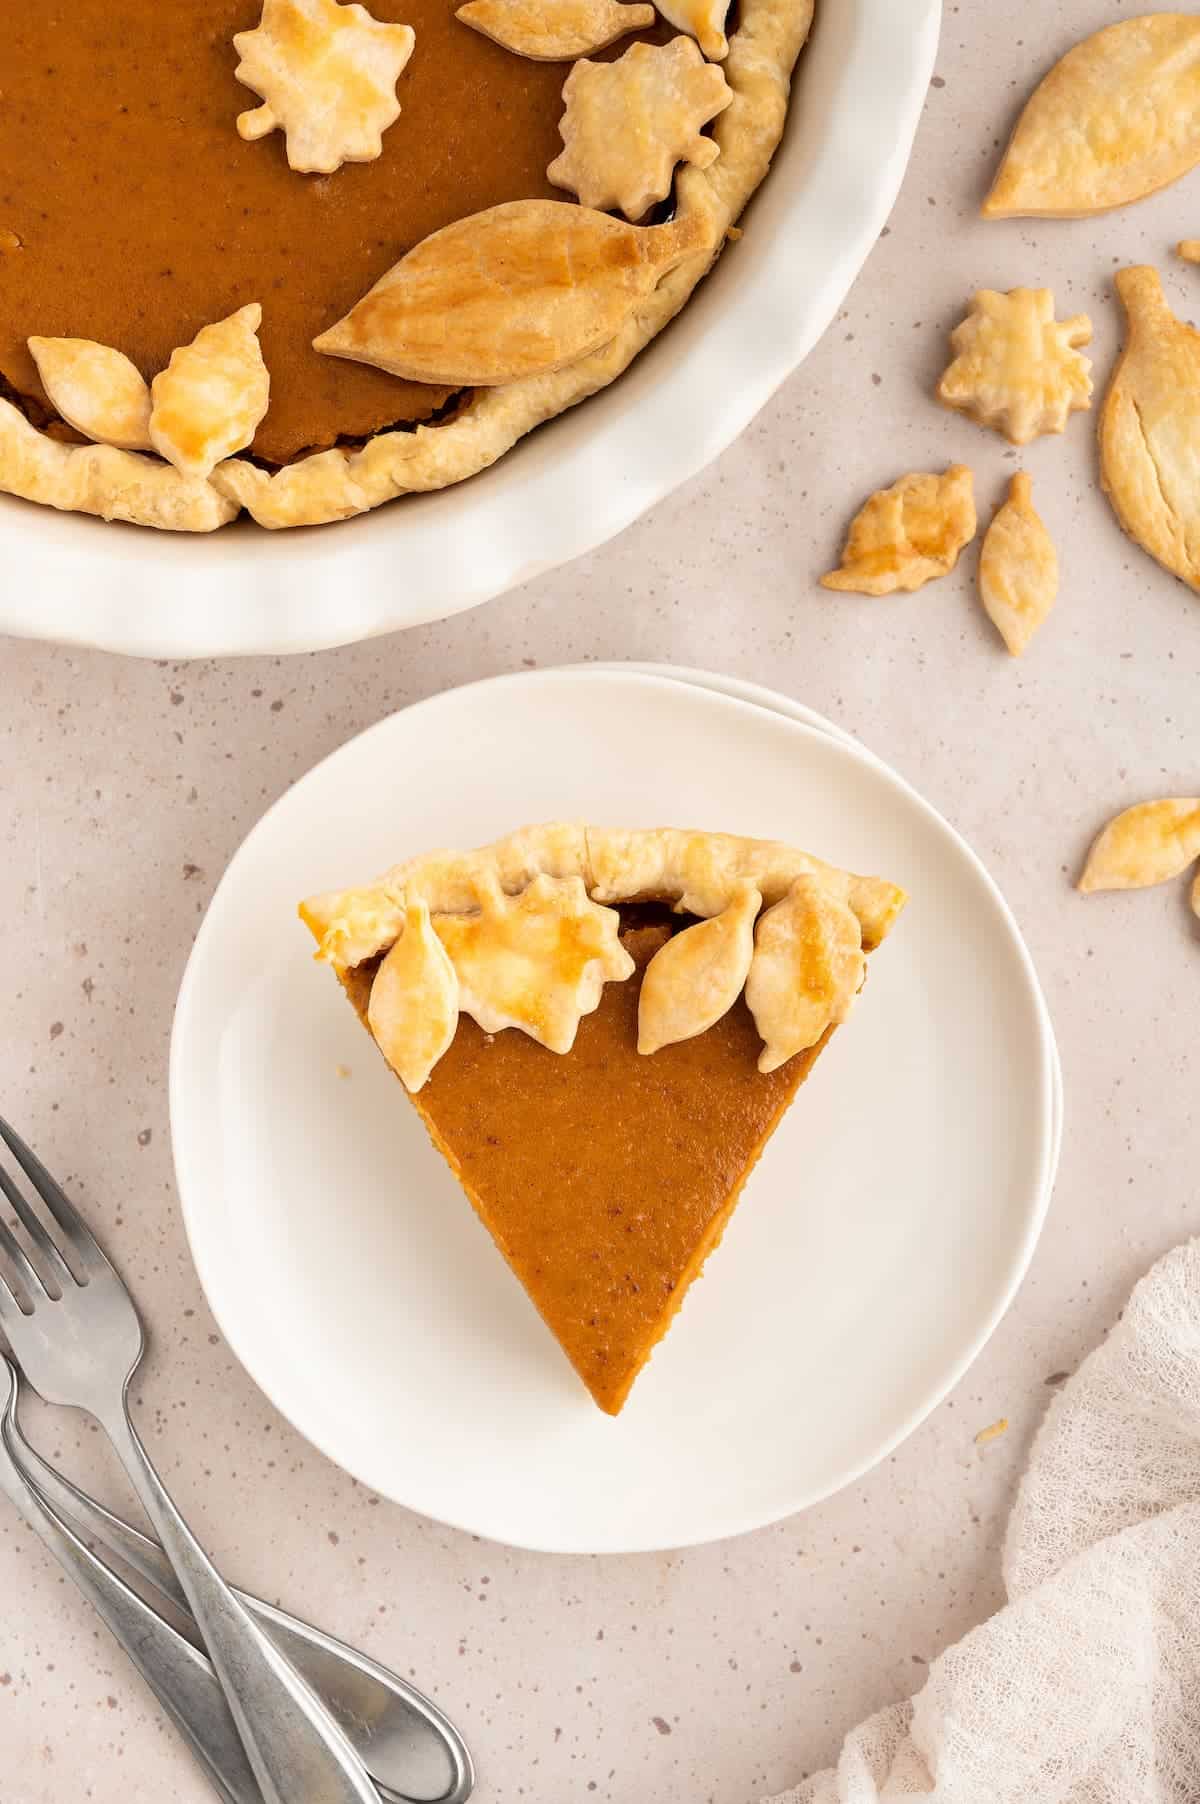 Overhead view of a slice of vegan sweet potato pie on a plate and decorated with pastry leaves.